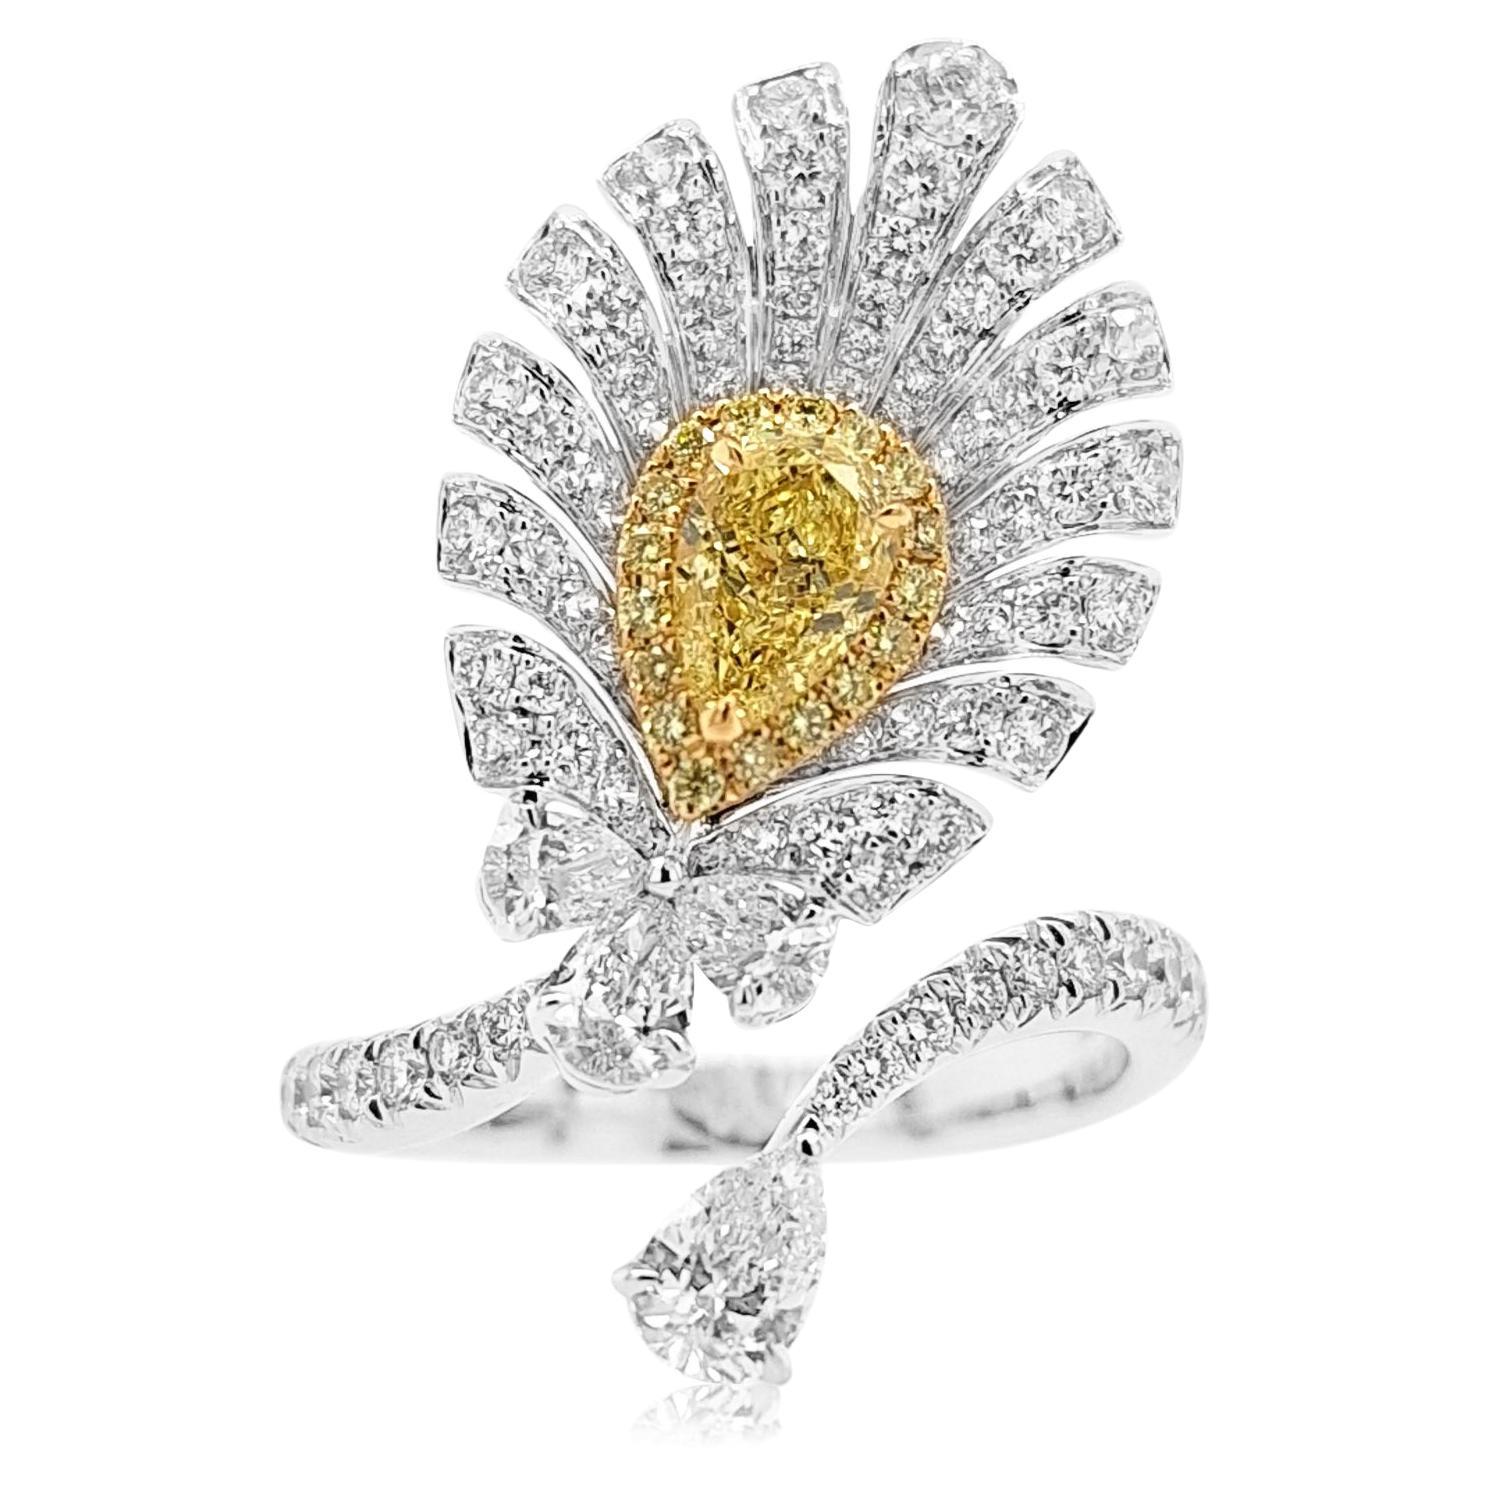 Cocktail Ring with GIA Certified Pear Shape Yellow Diamond and White Diamonds